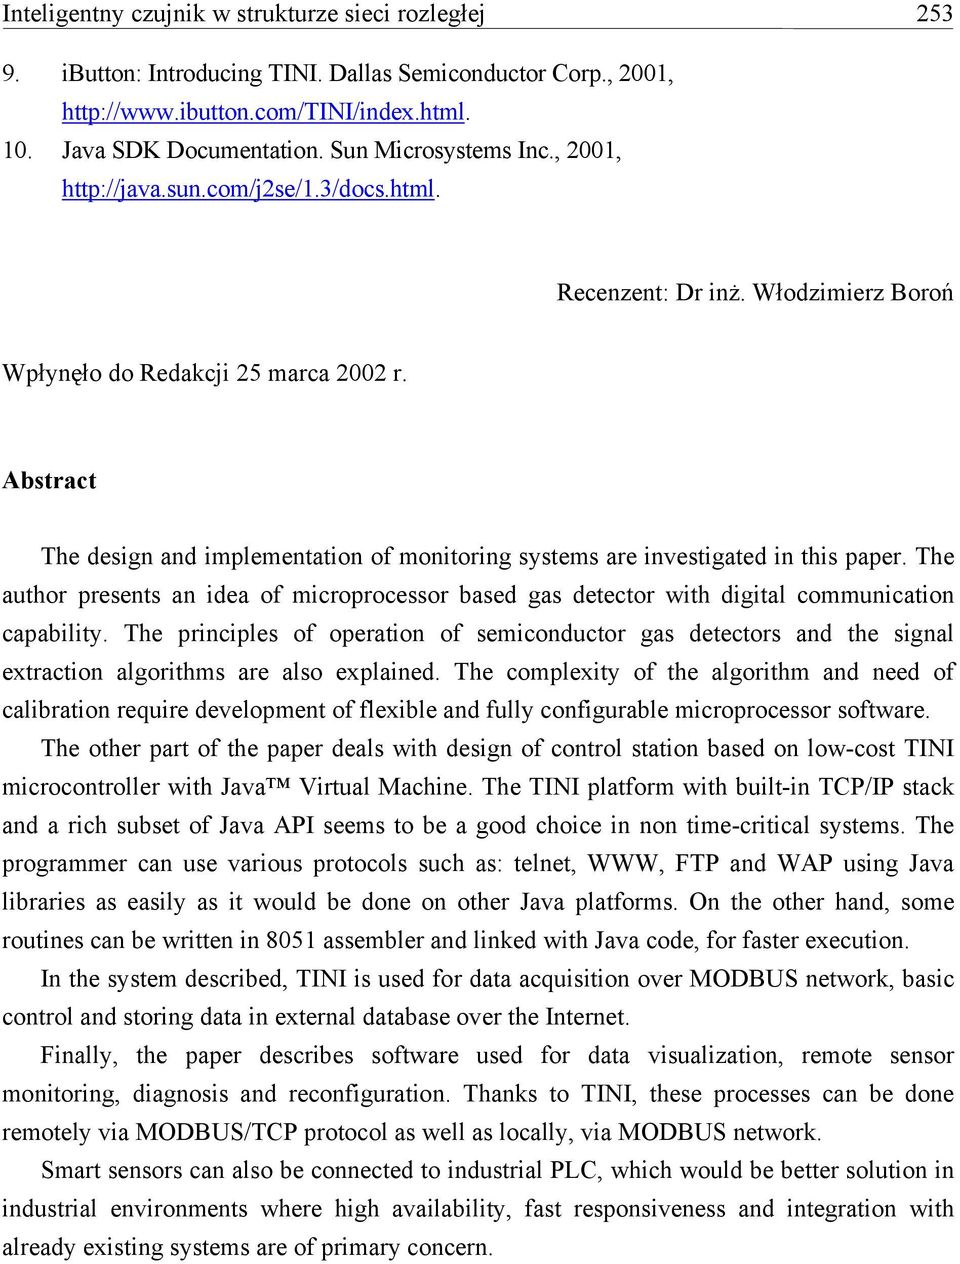 Abstract The design and implementation of monitoring systems are investigated in this paper. The author presents an idea of microprocessor based gas detector with digital communication capability.